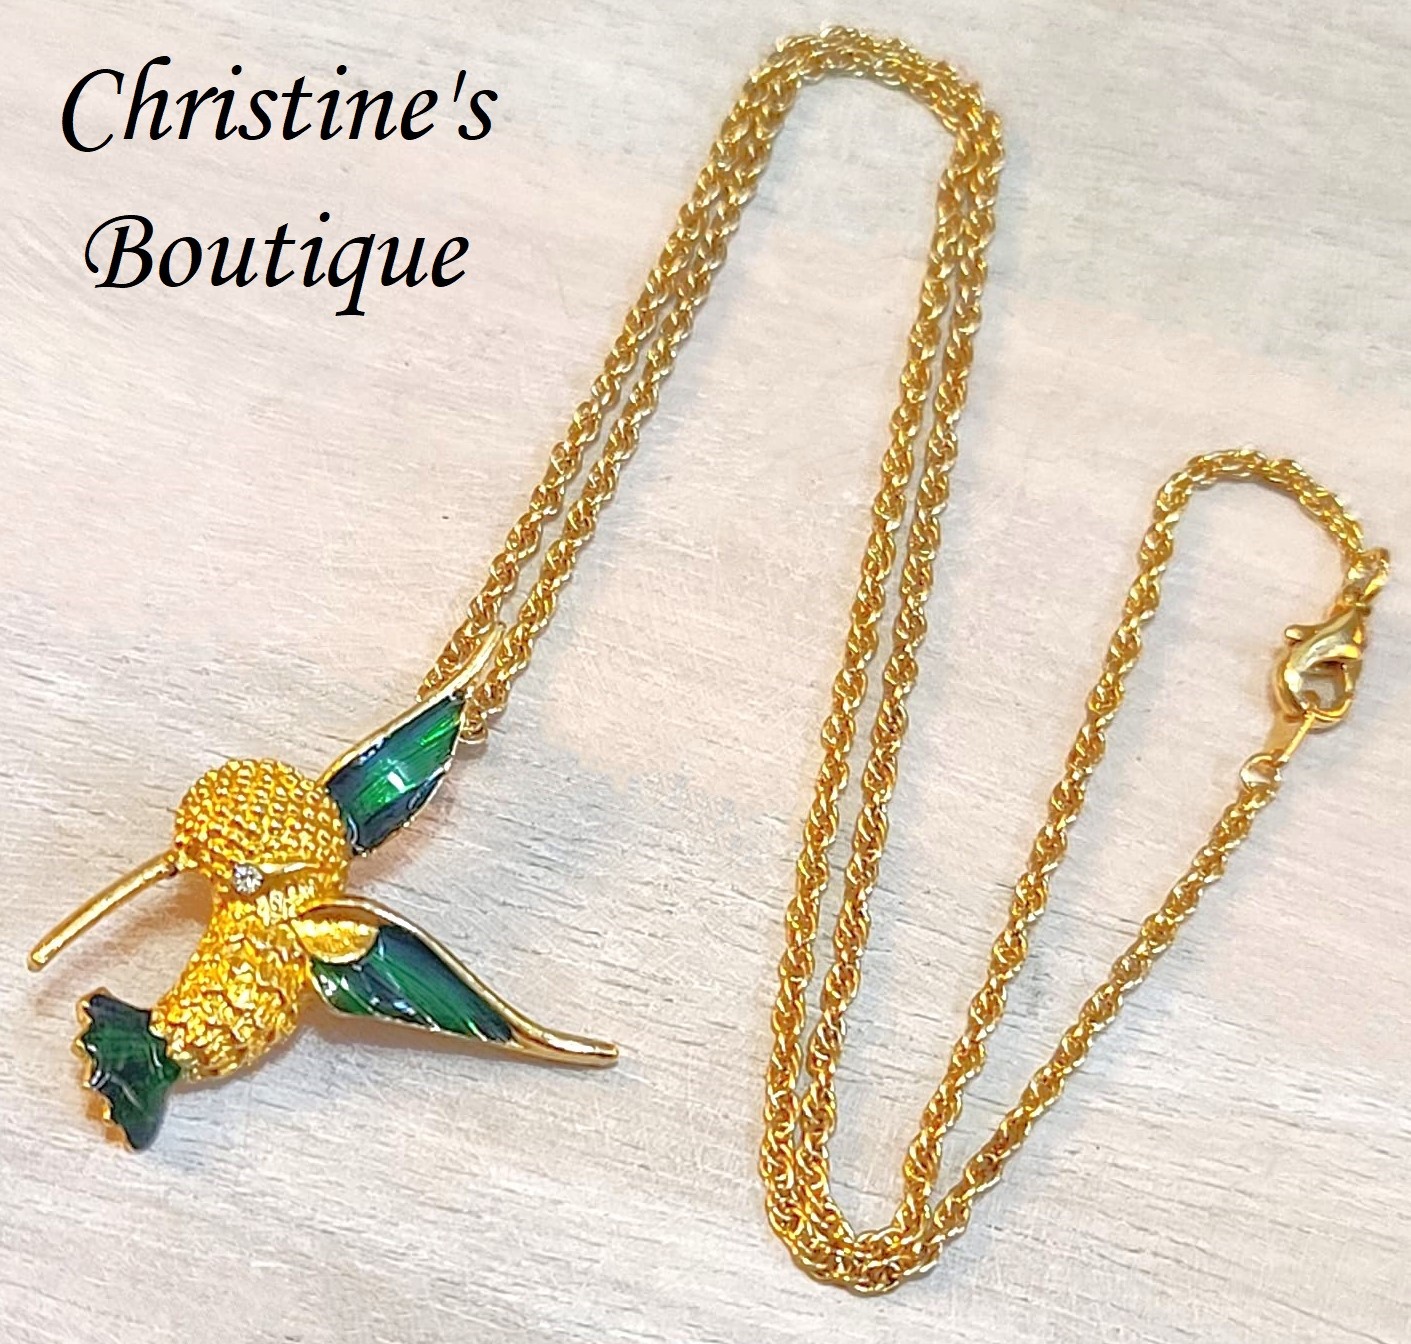 Hummingbird pendant necklace with chain, vintage enamel hummingbird - Click Image to Close